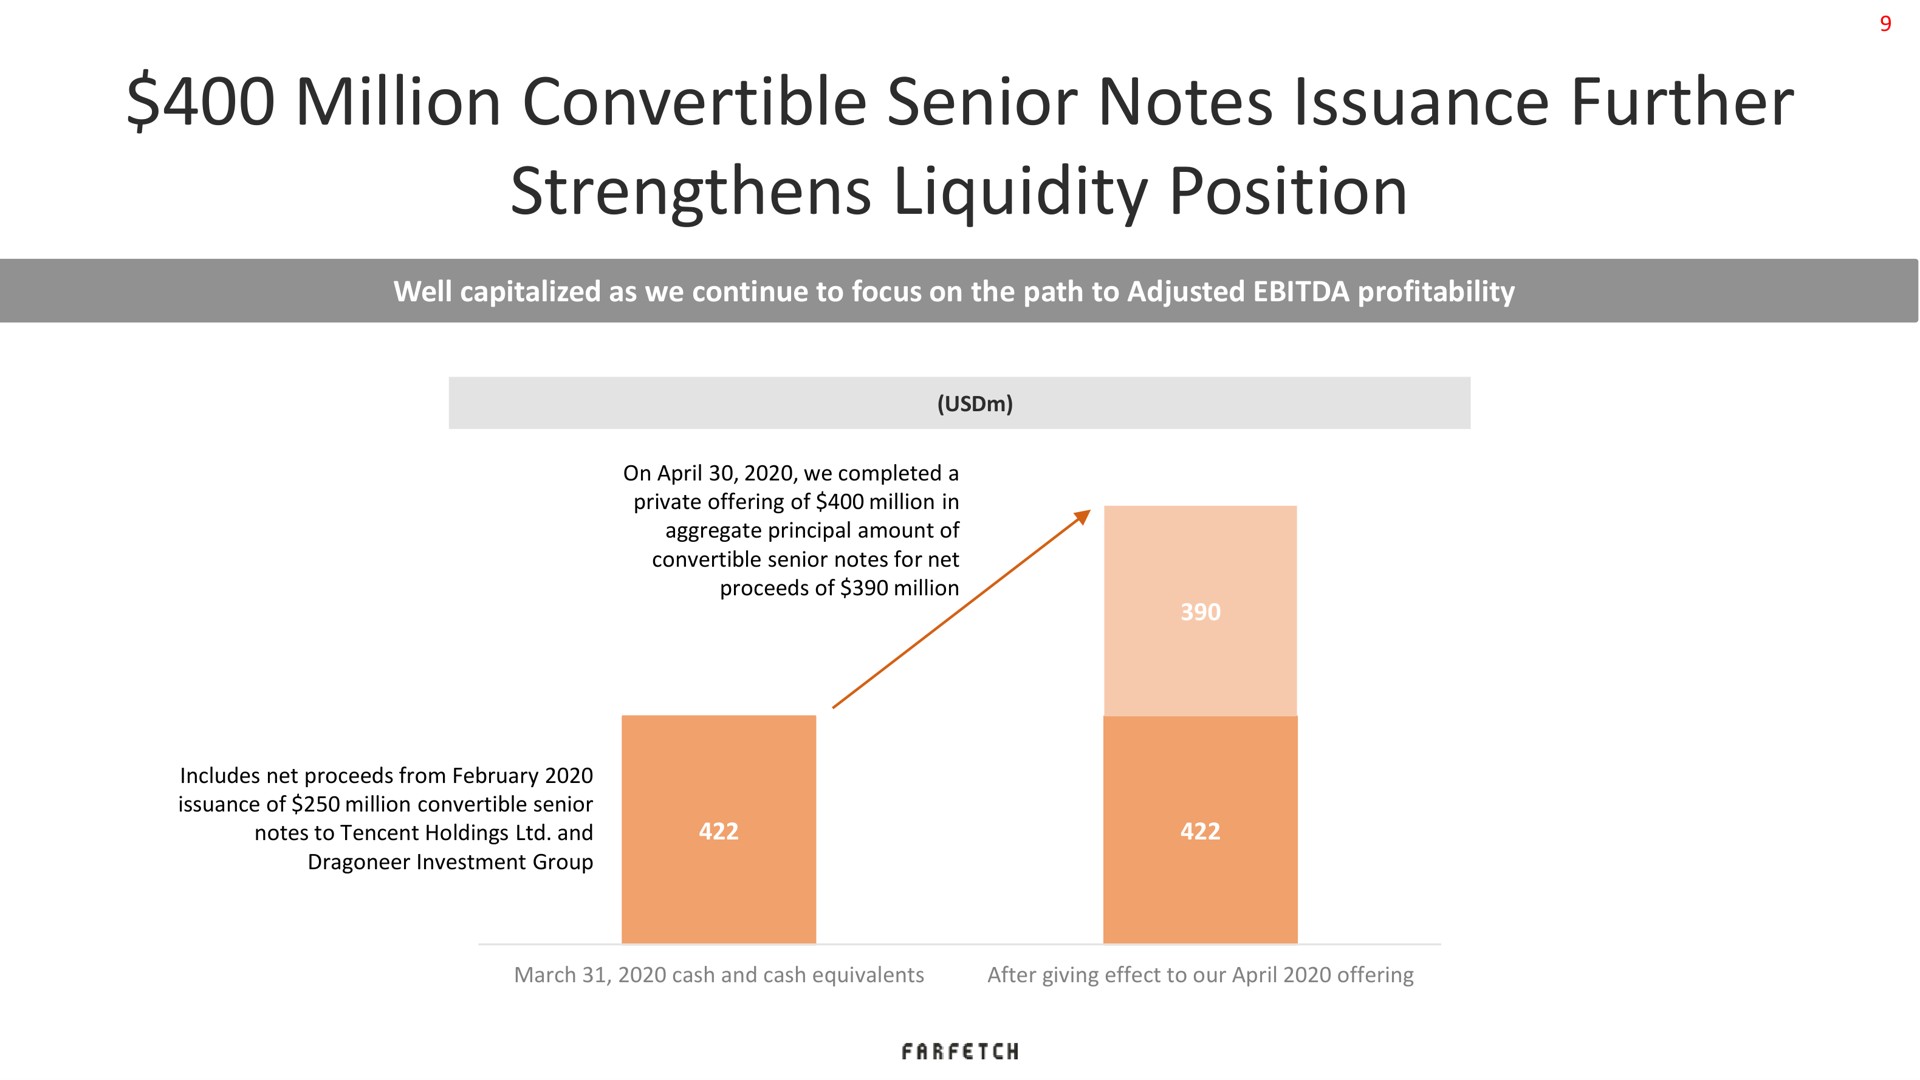 million convertible senior notes issuance further strengthens liquidity position | Farfetch